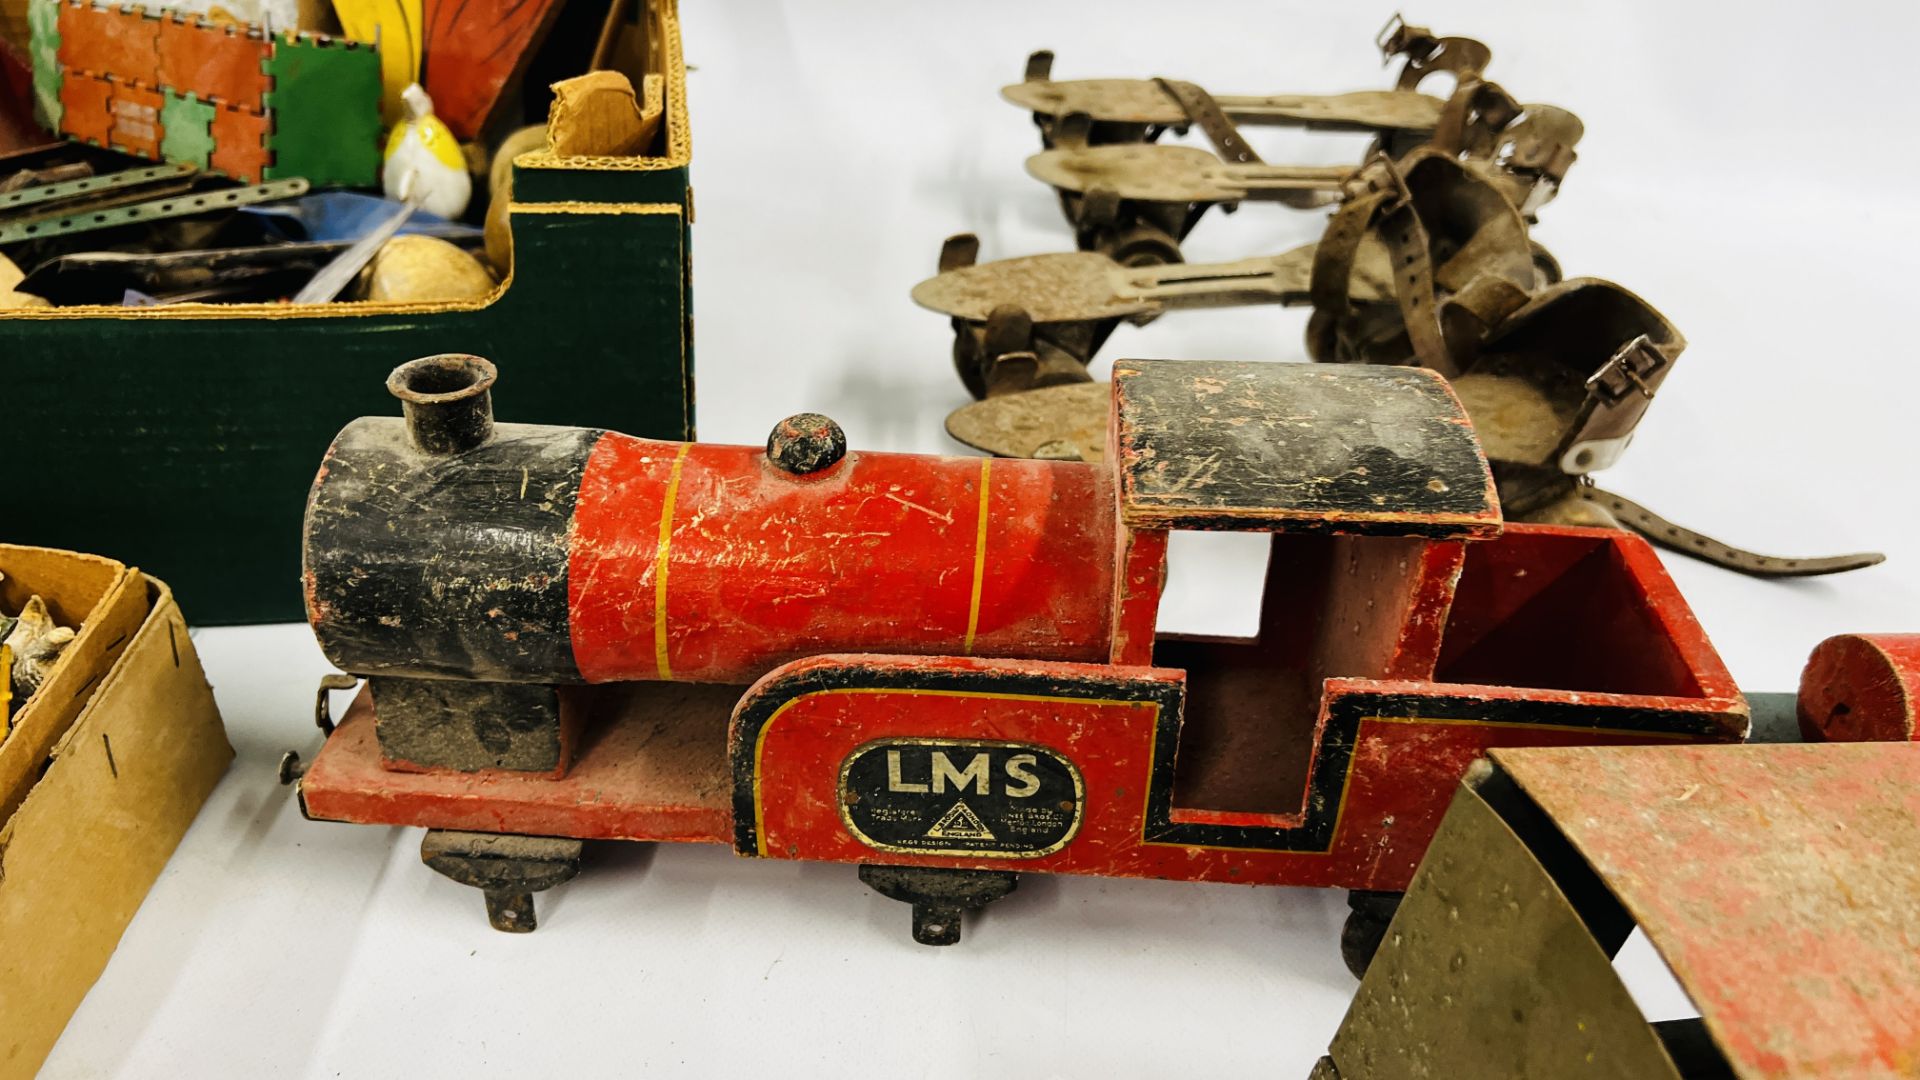 VINTAGE LINES BRO'S WOODEN LOCOMOTIVE AND CARRIAGES A/F ALONG WITH A BOX CONTAINING FARM ANIMALS, - Image 8 of 15